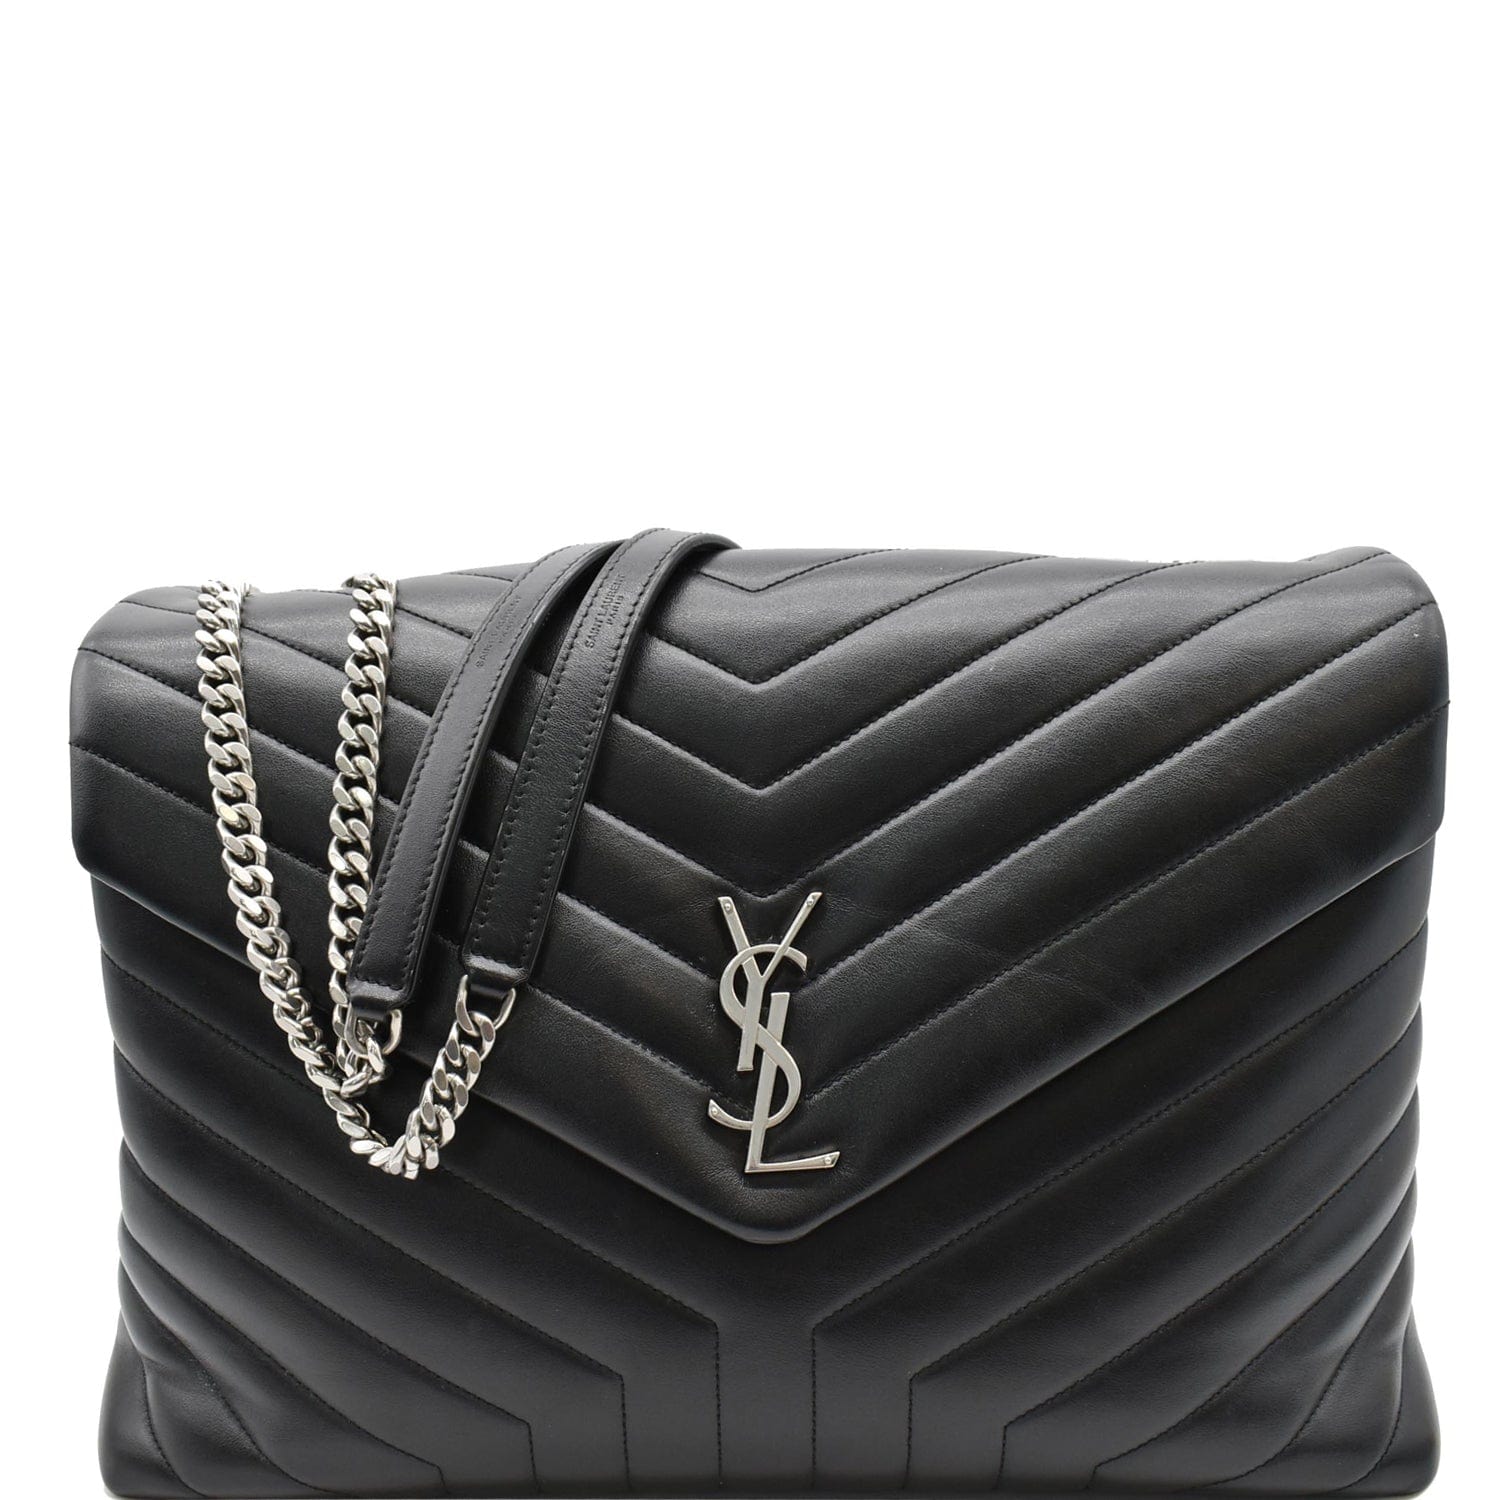 YSL Loulou Large Black Bag Silver Chain - Preowned